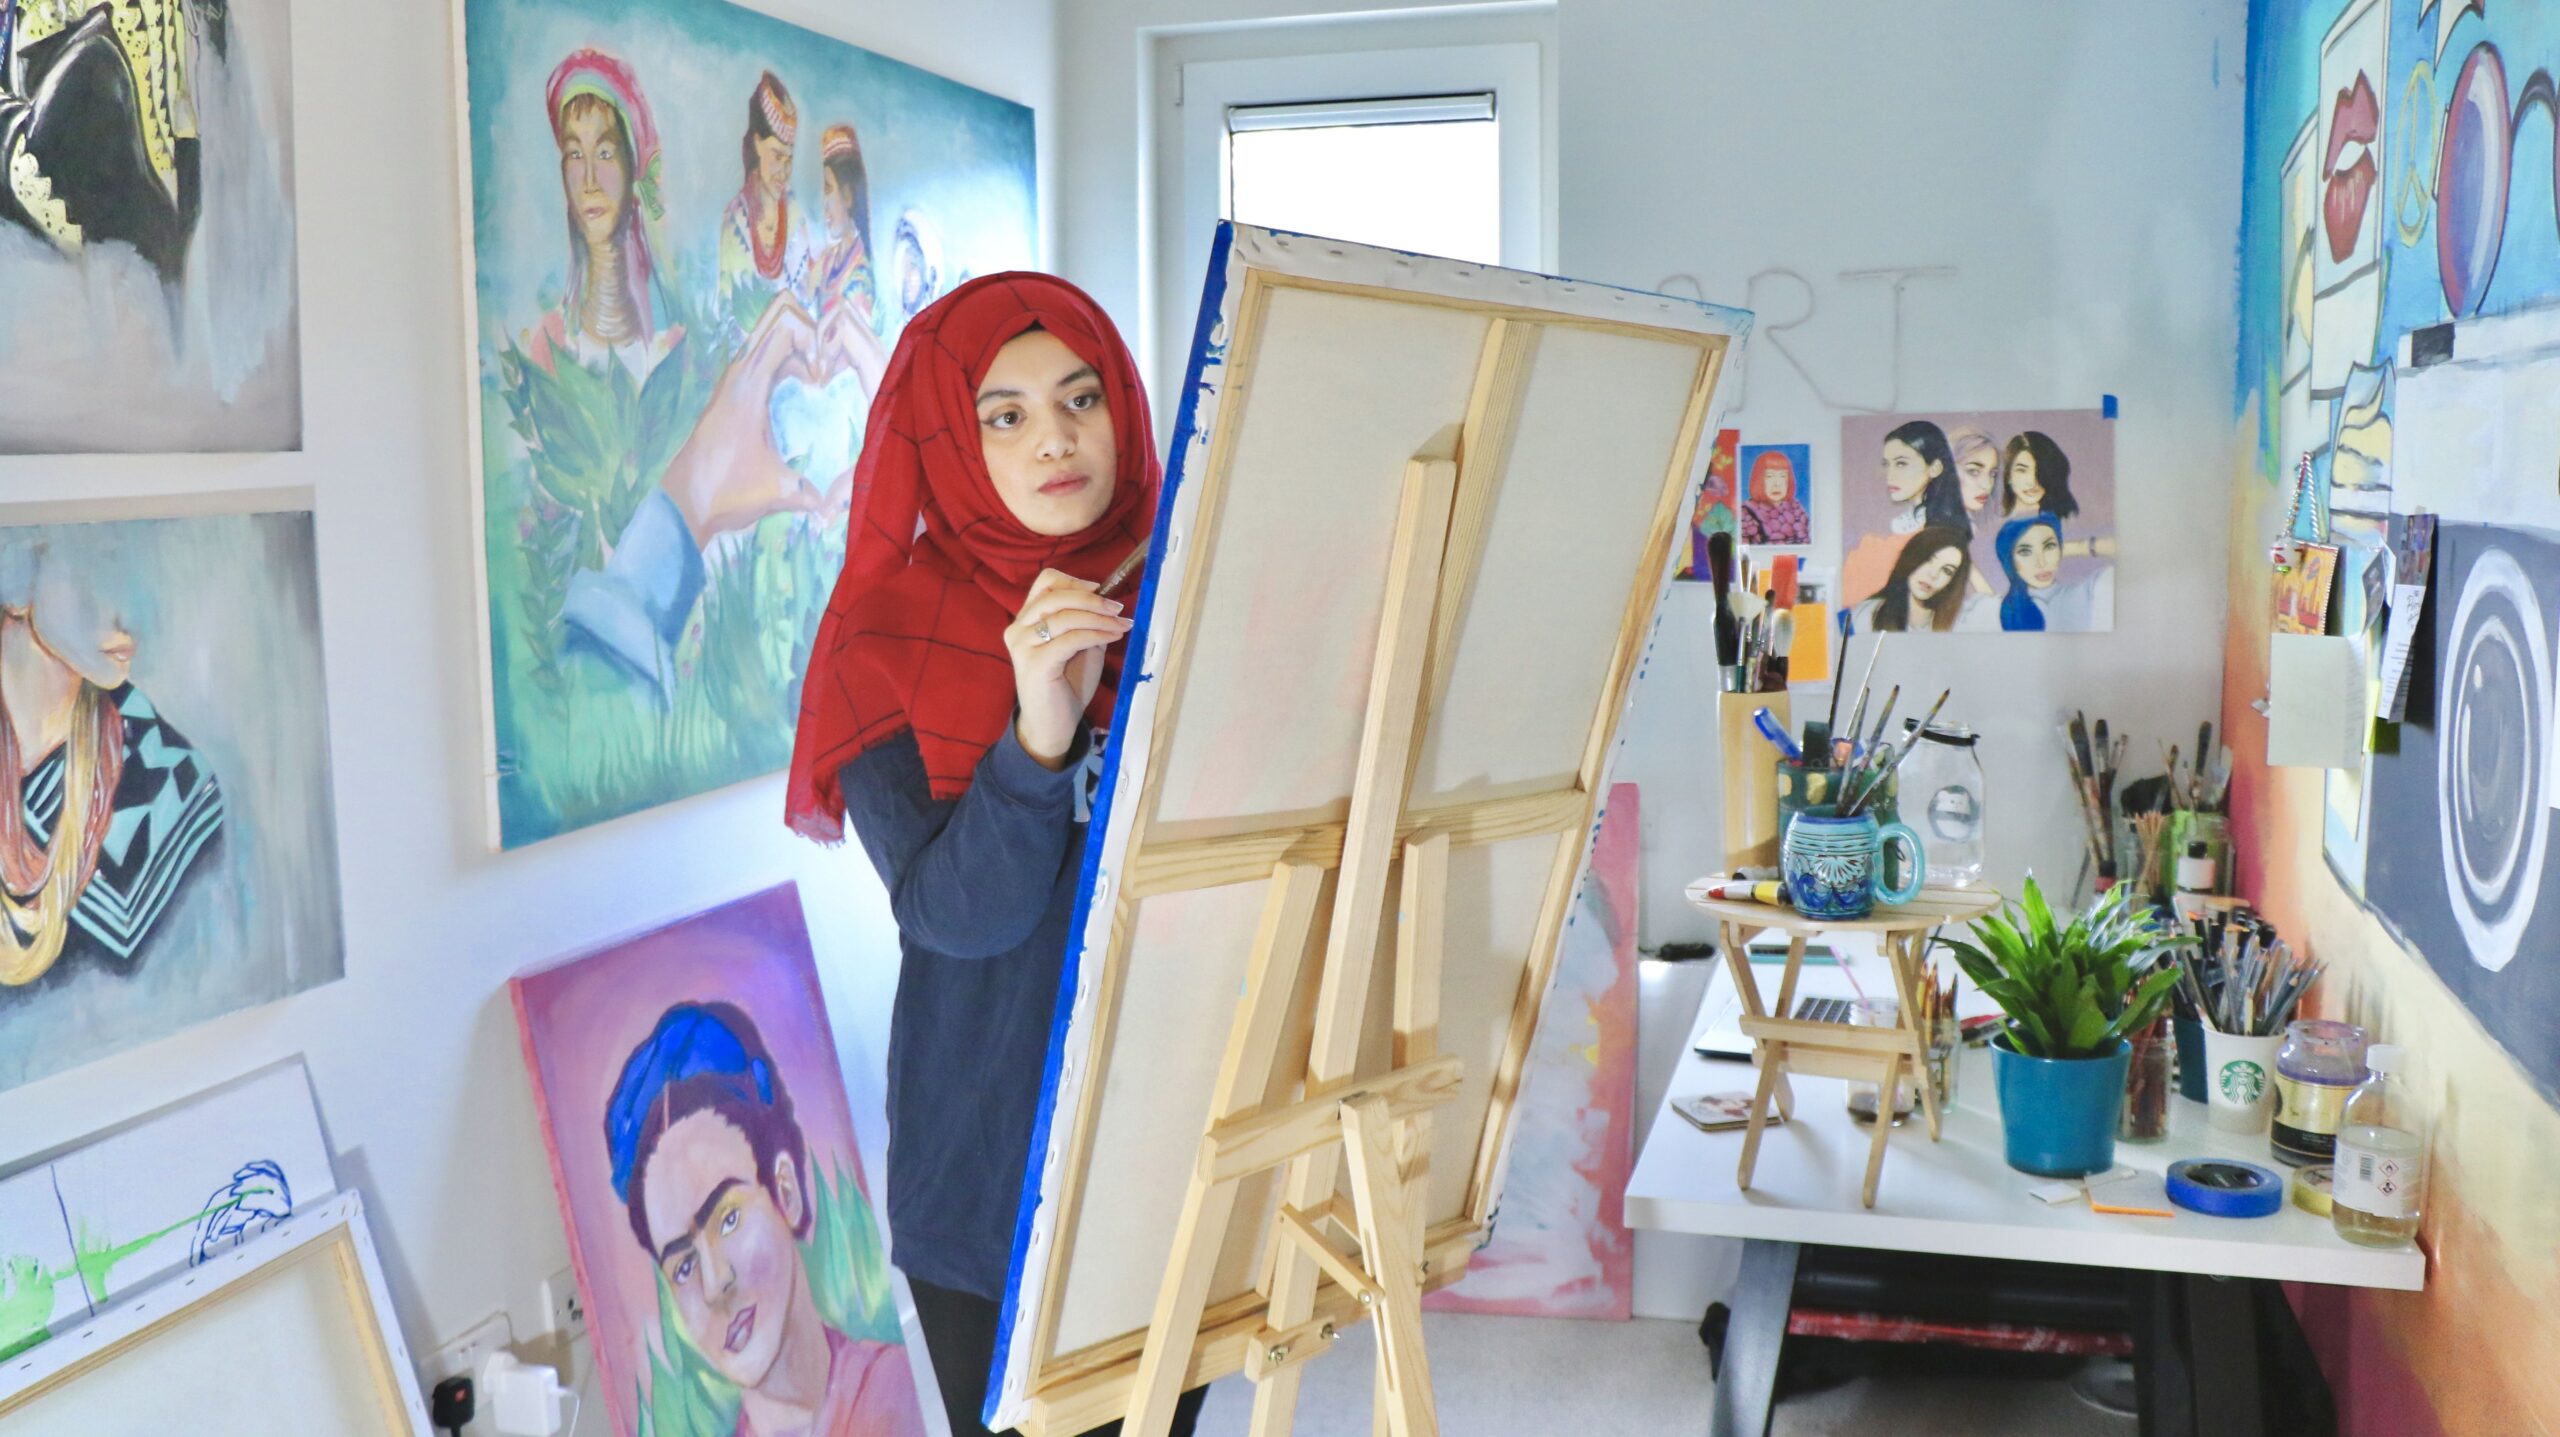 Maliha Abidi painting on a canvas in a studio full of paintings of women